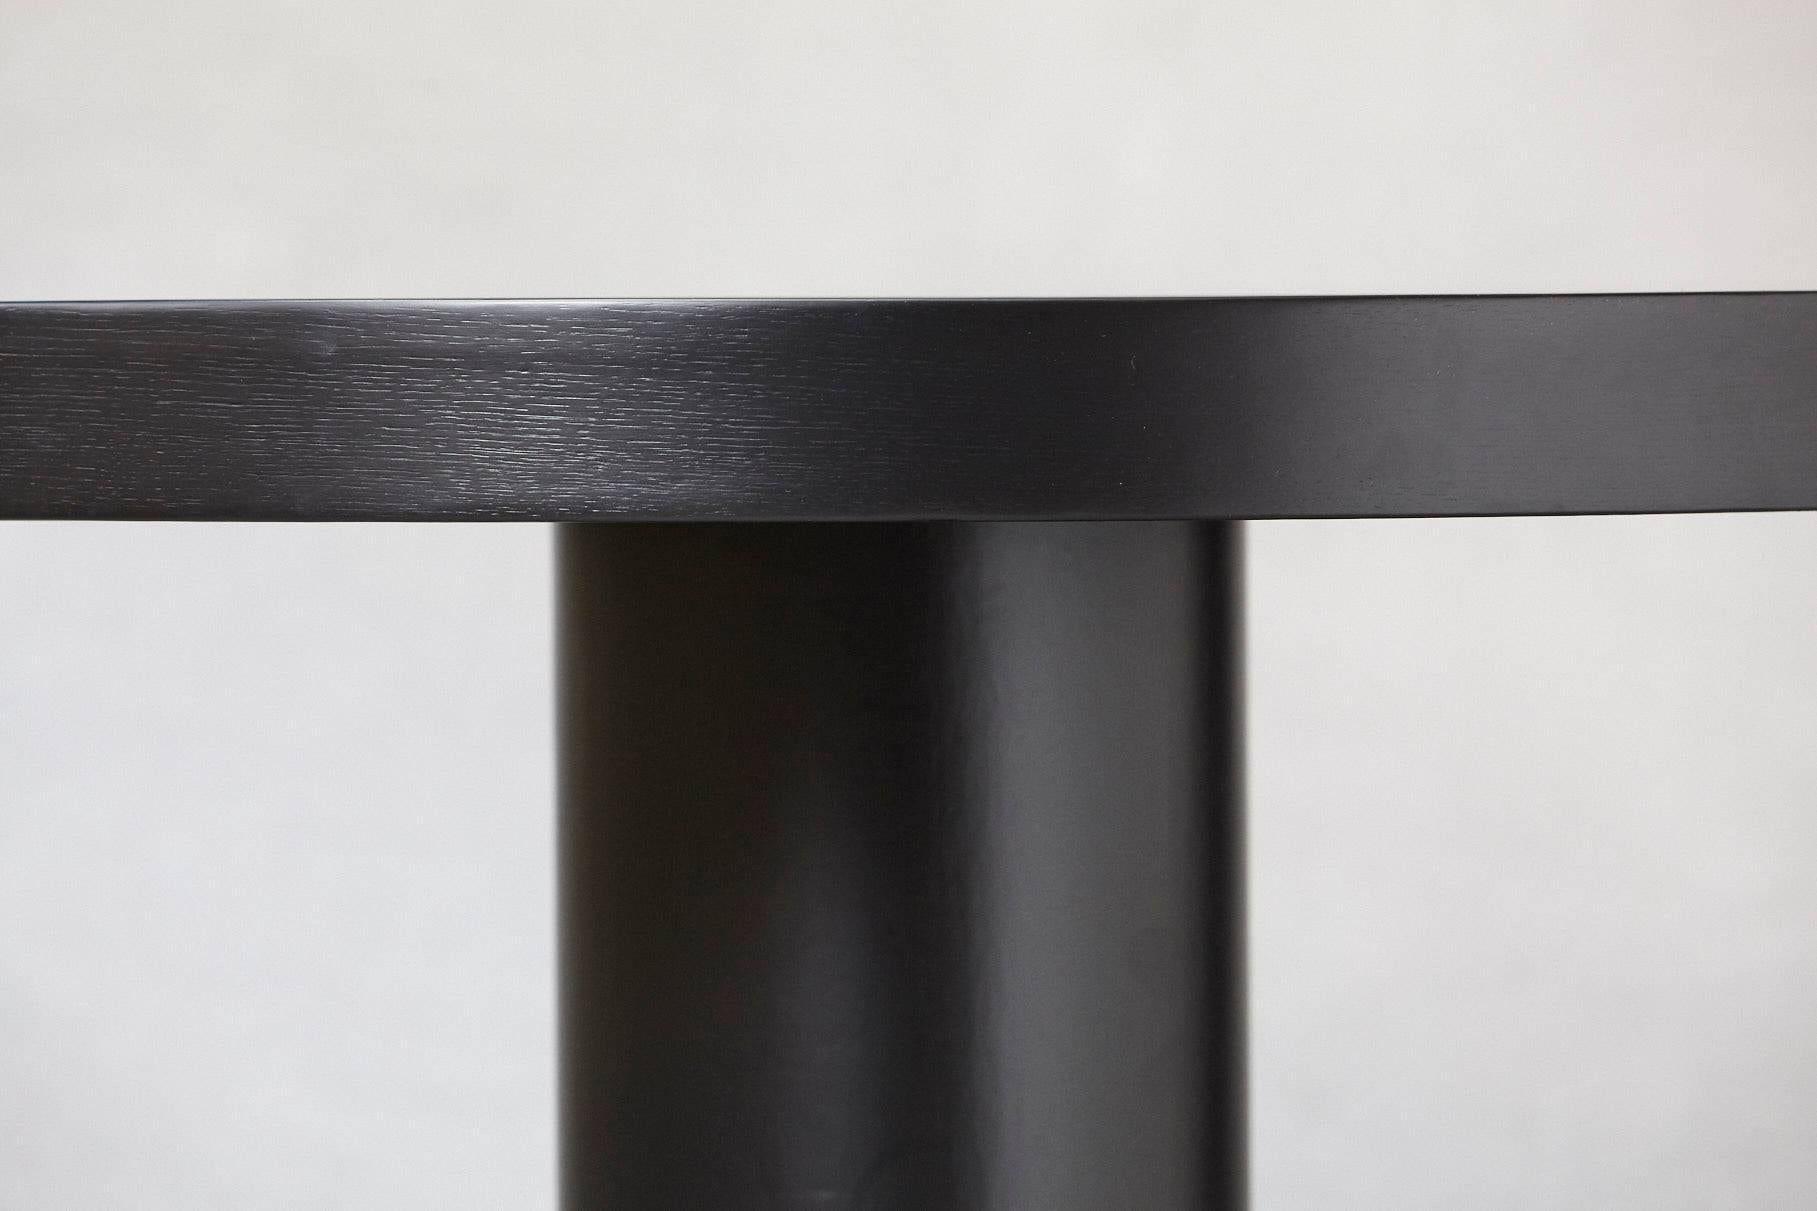 Mid-20th Century Modern Puristic Oak Center Table in New Black Finish, 1960s